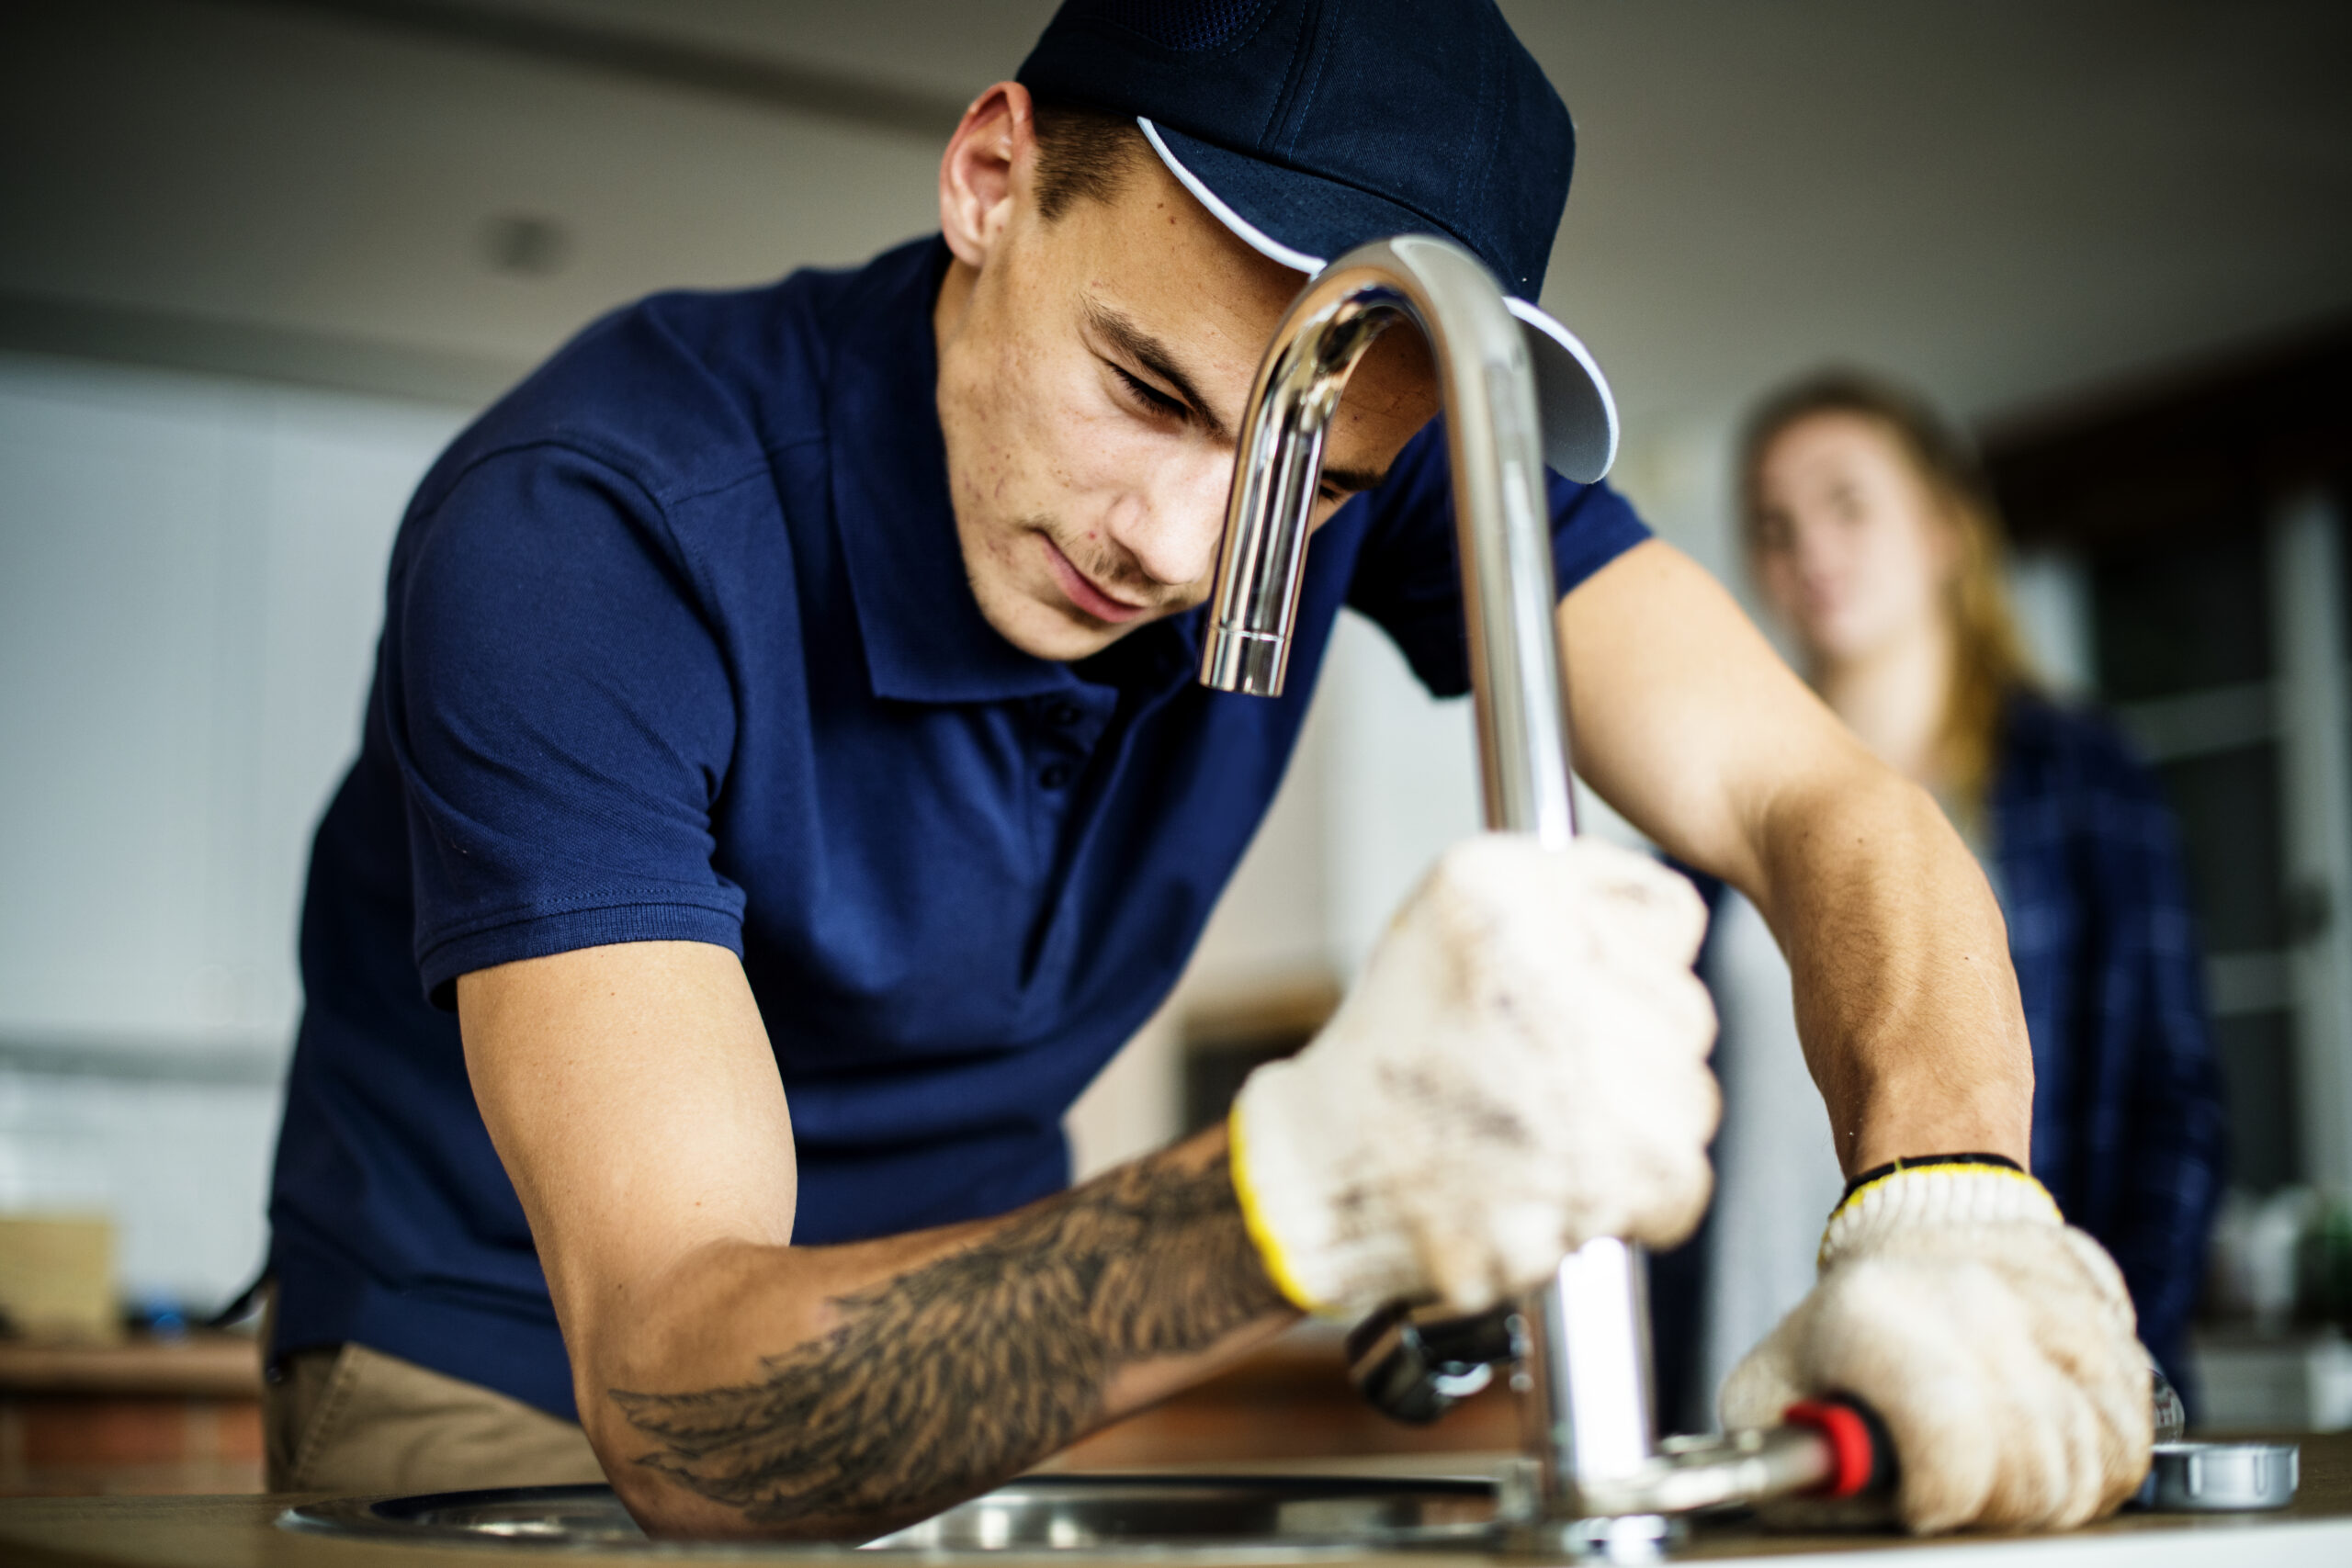 Preventive Maintenance for Plumbing Systems: Benefits and Best Practices